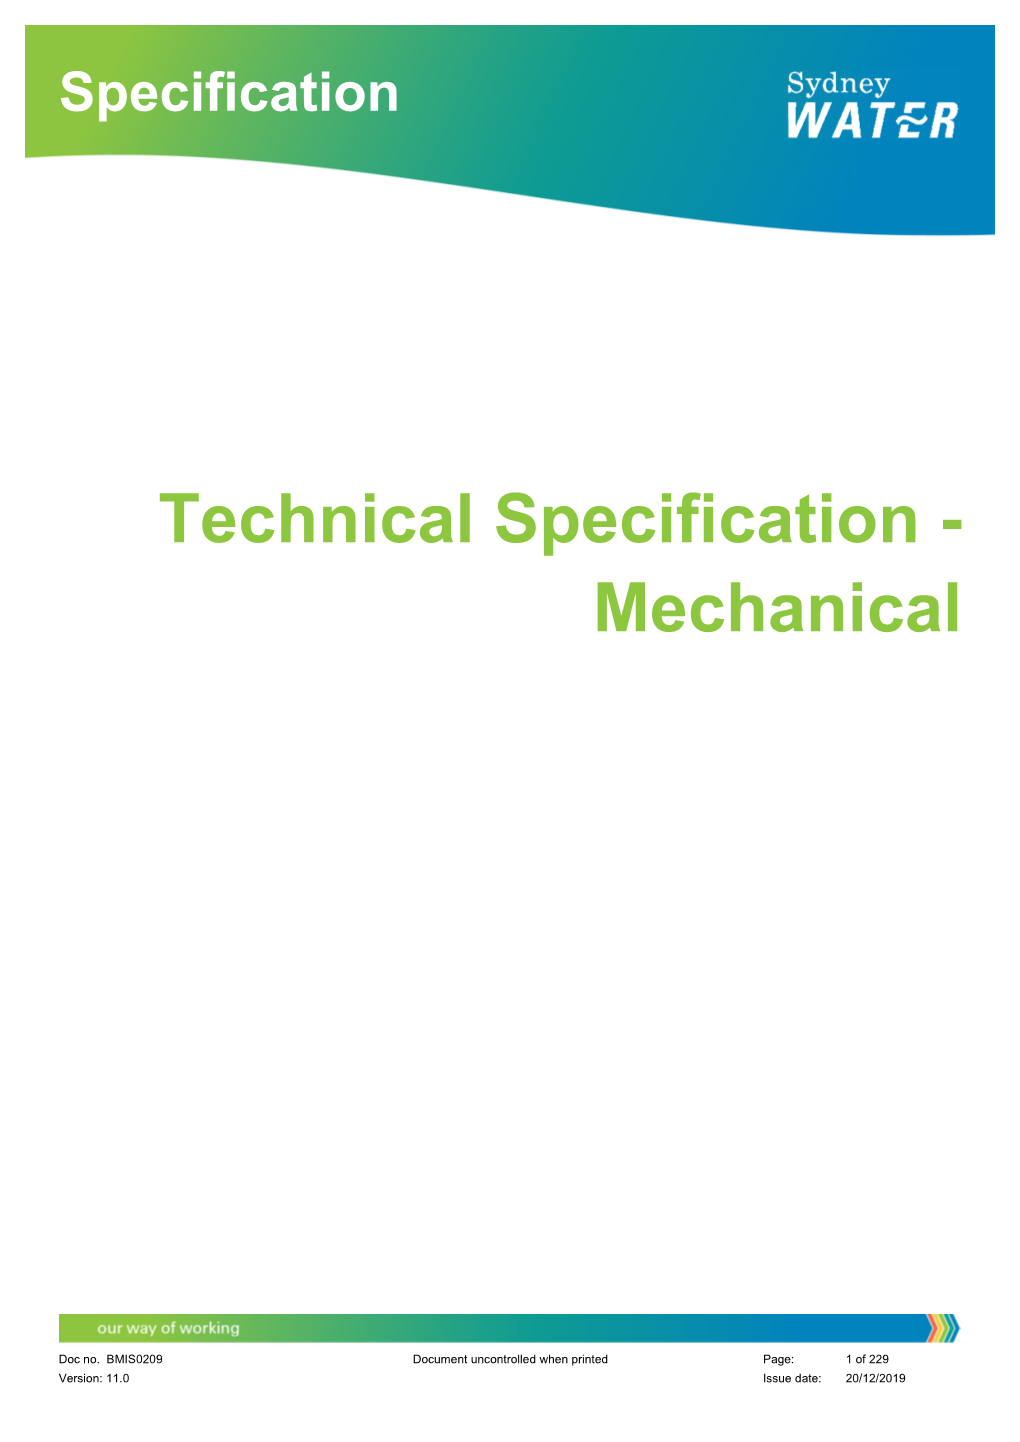 Technical Specification - Mechanical